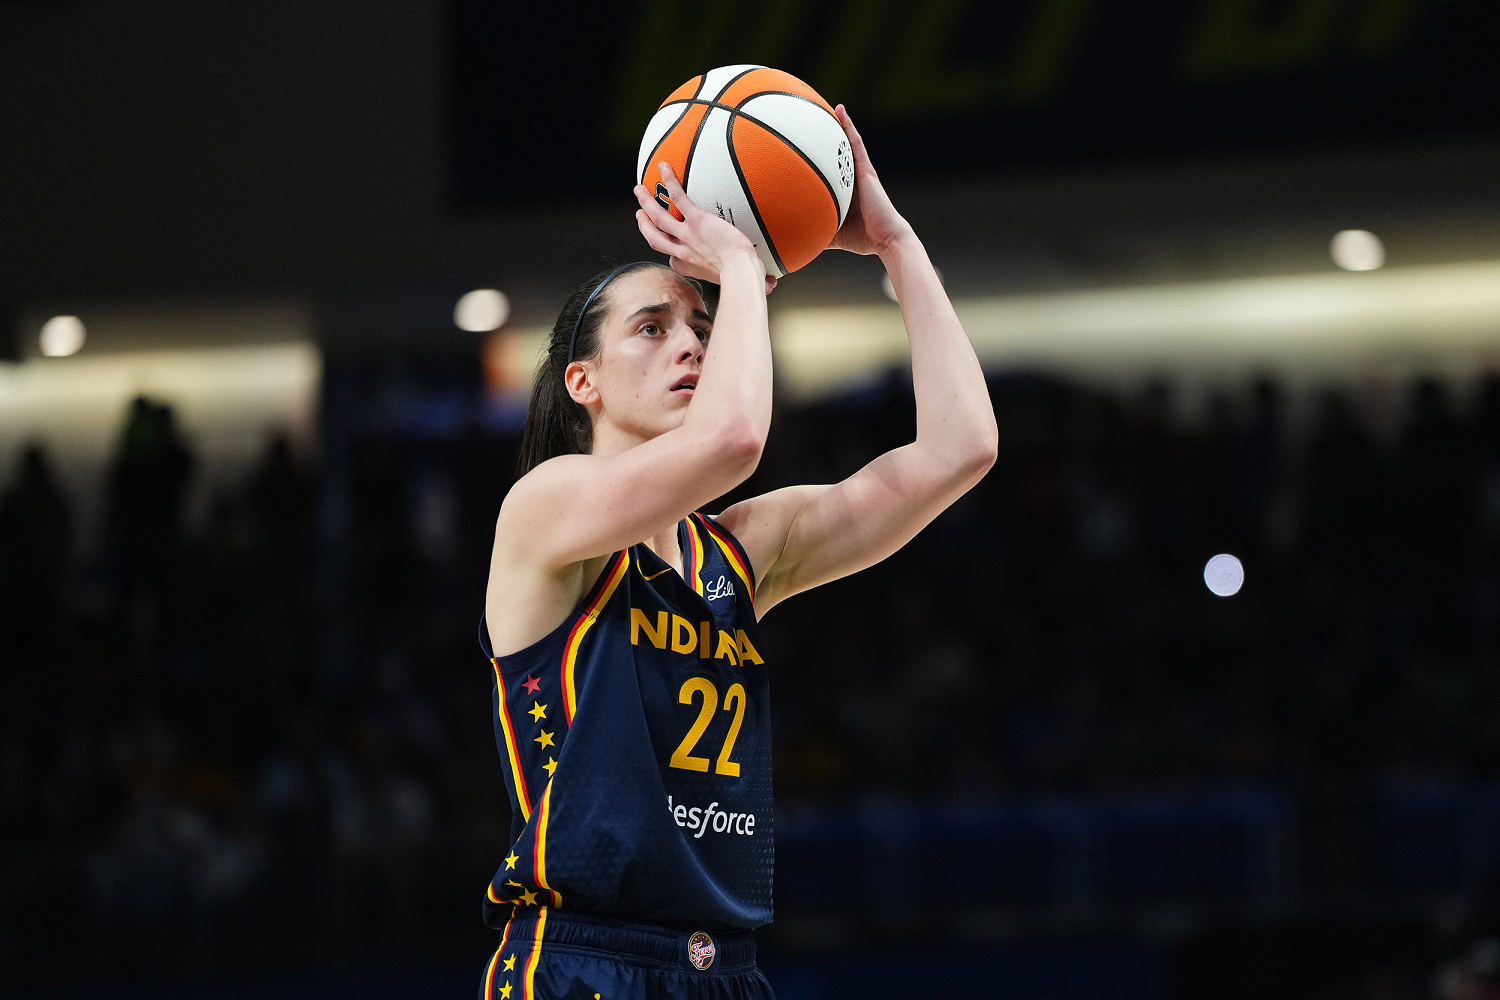 Disney+ will stream Caitlin Clark’s WNBA debut in the platform’s first live sports event